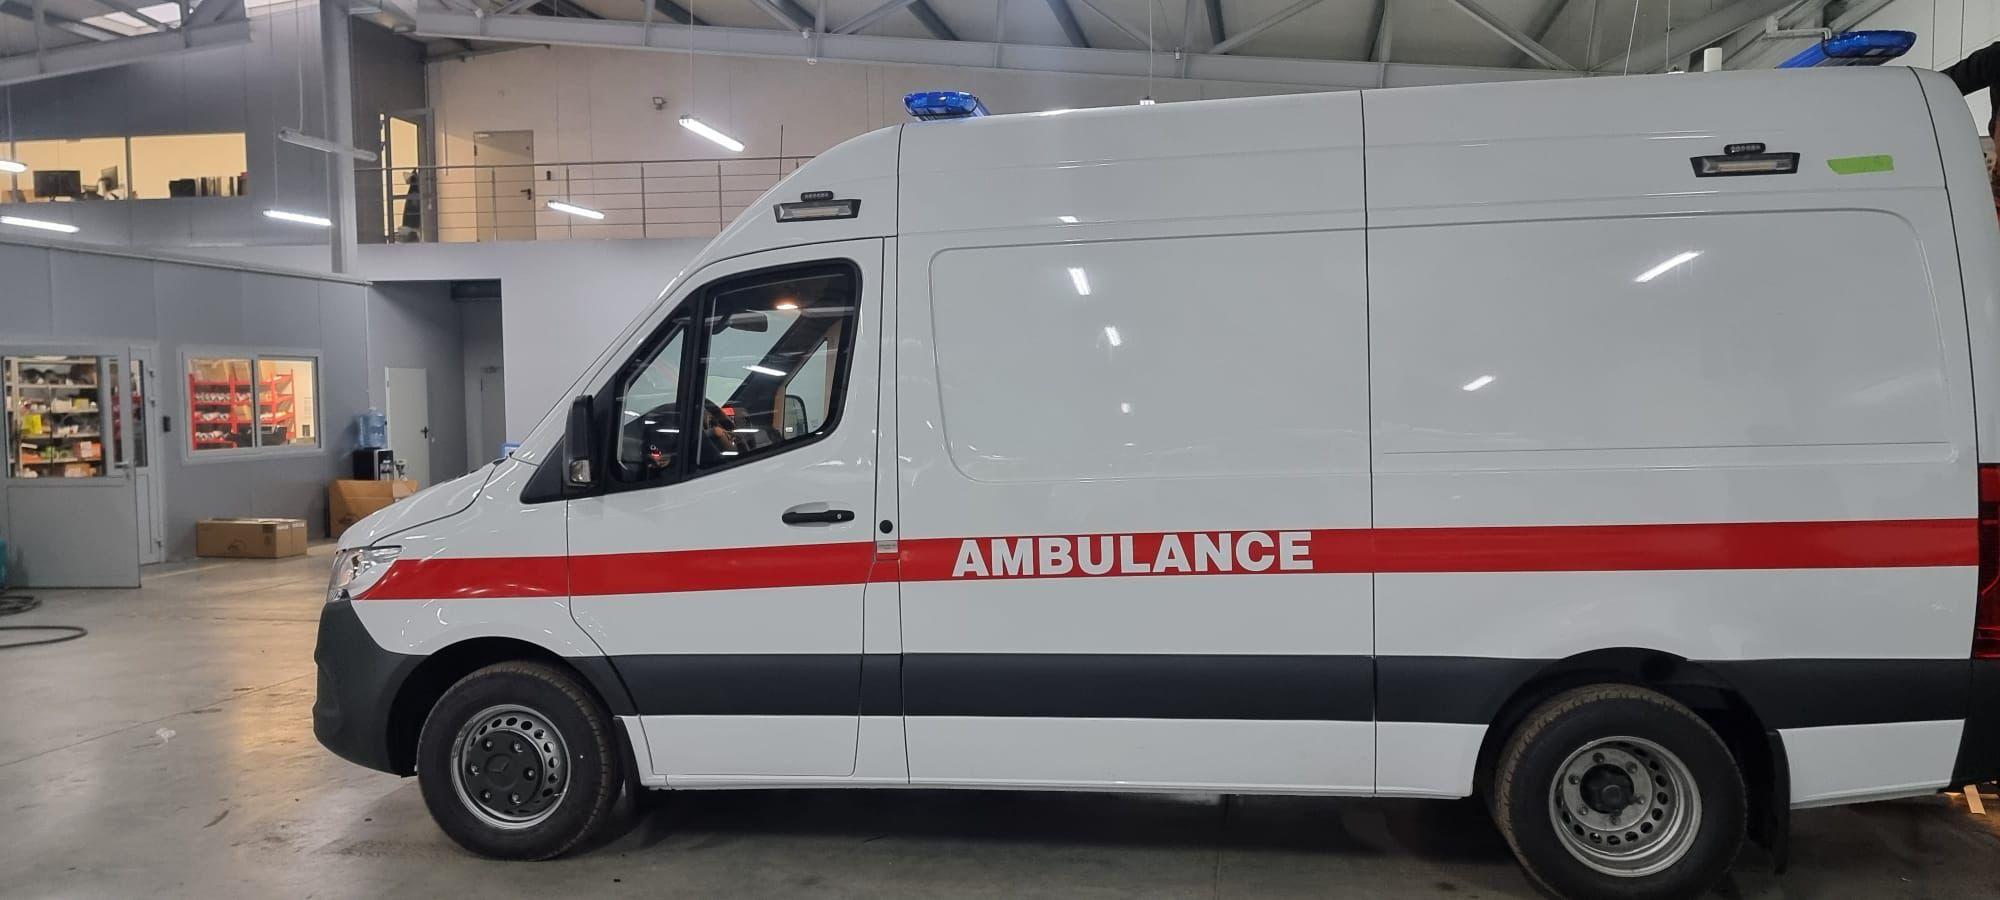 Israel's Ministry of Defense Delivers Four Armored Ambulances to Ukraine